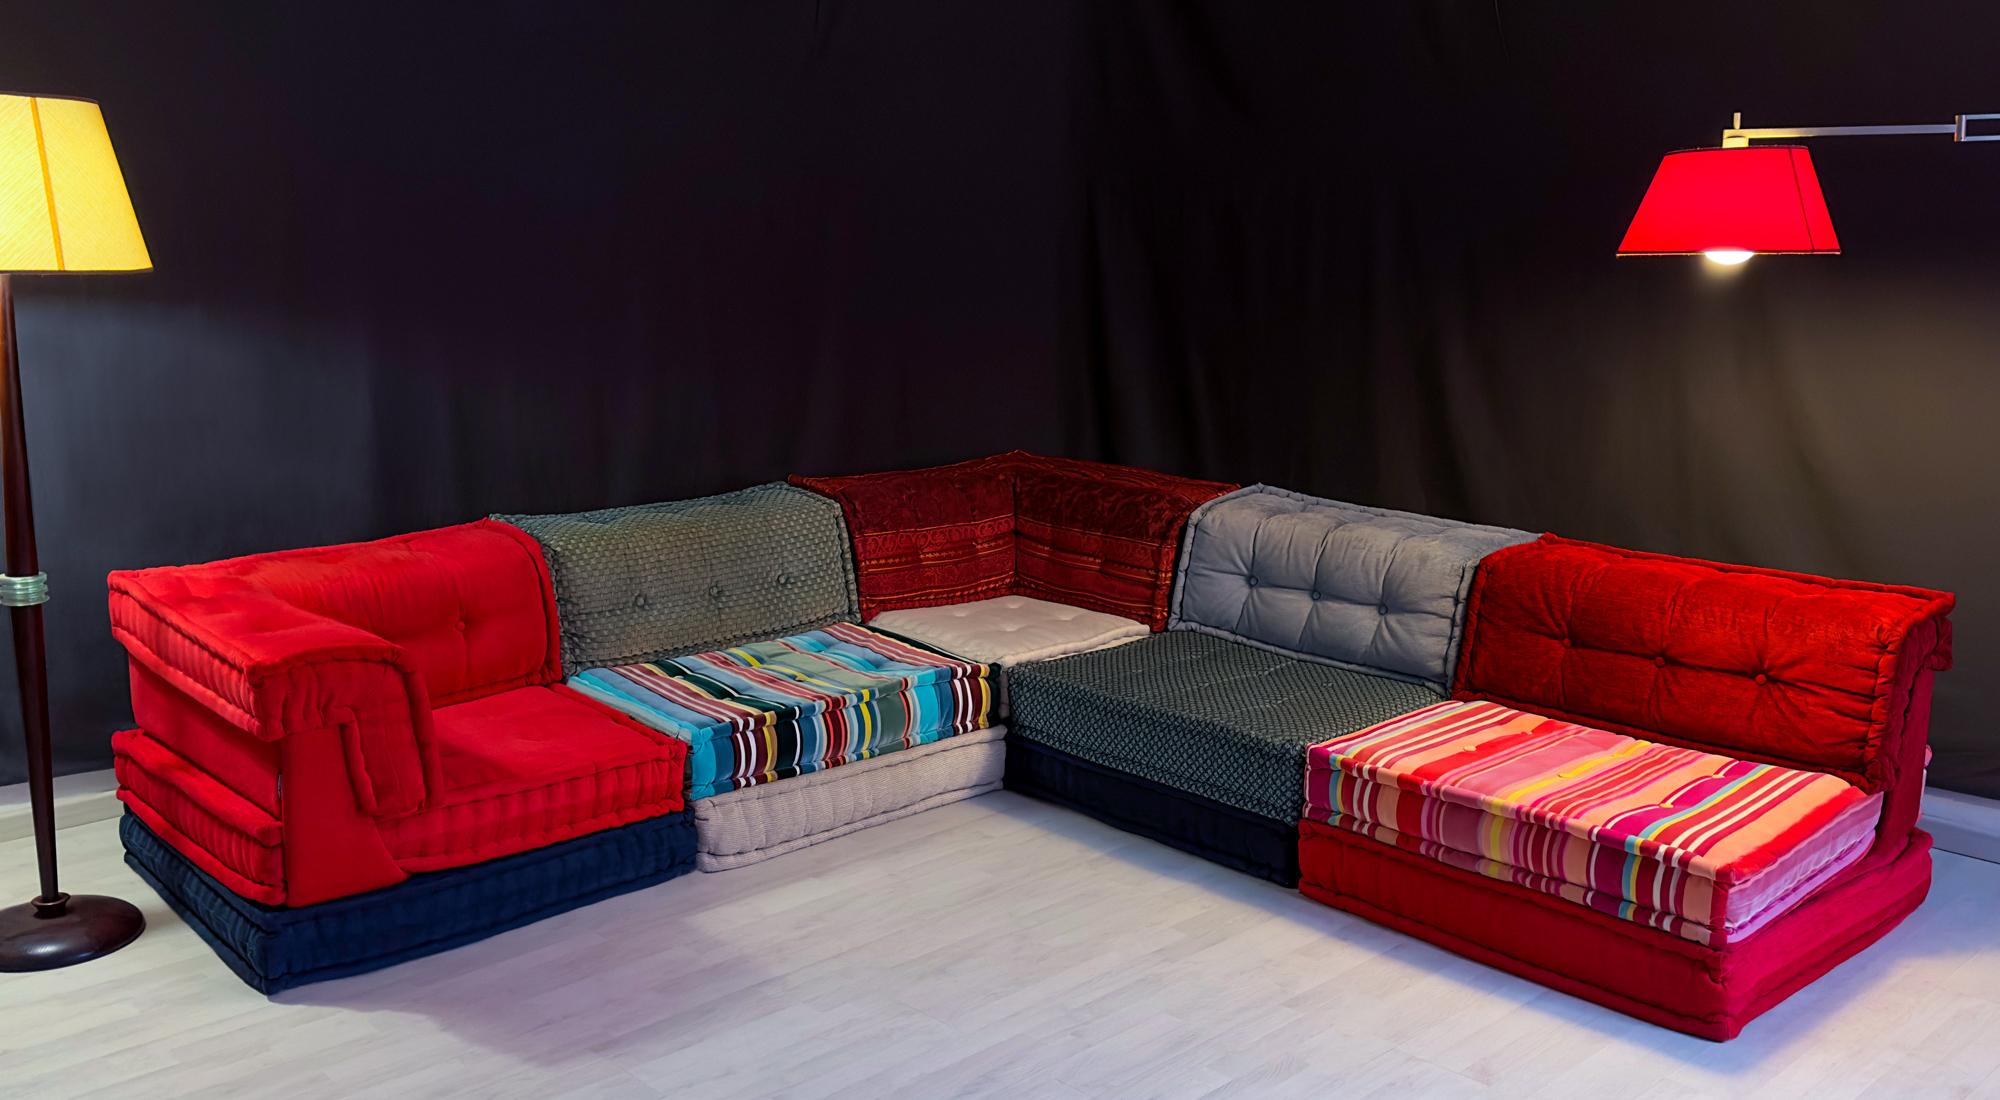 Indulge in the epitome of luxury with the original Roche Bobois MAH JONG sofa, a masterpiece by Hans Hopfer, adorned with high-quality fabrics designed by Kenzo Takada. 

Elevate your living space by customizing arrangements through the